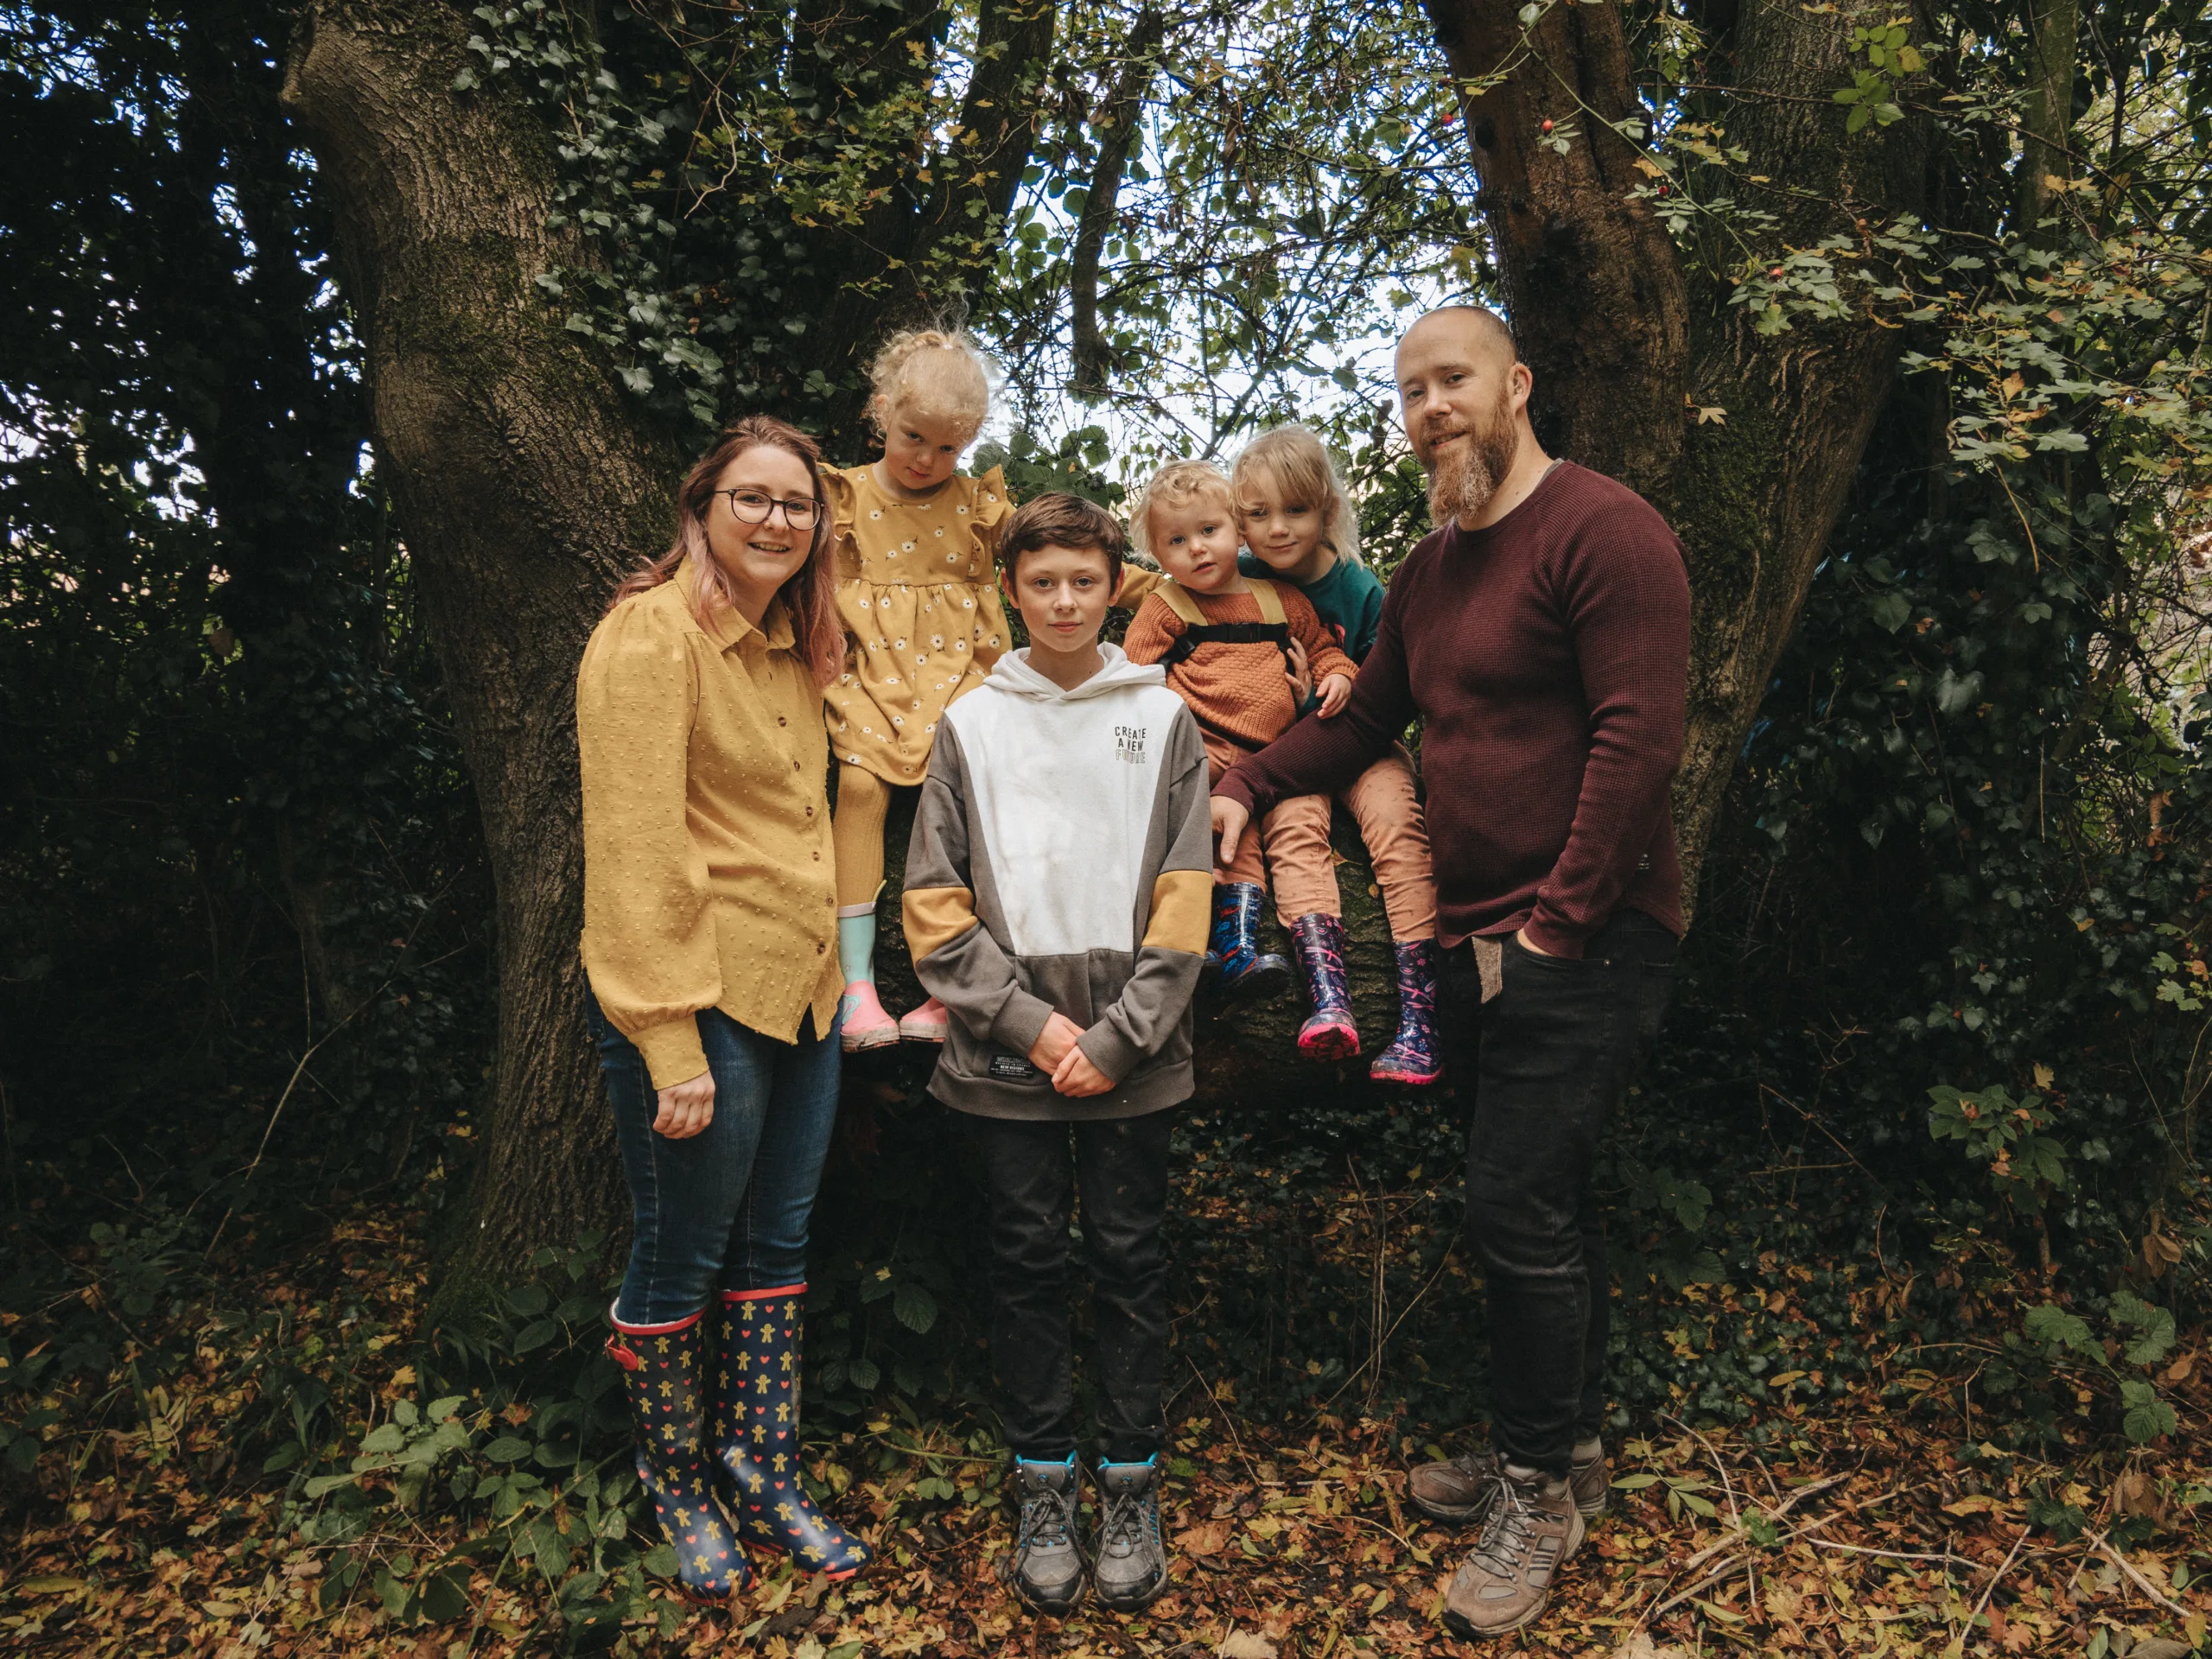 A family posing in front of a tree in Lincolnshire.